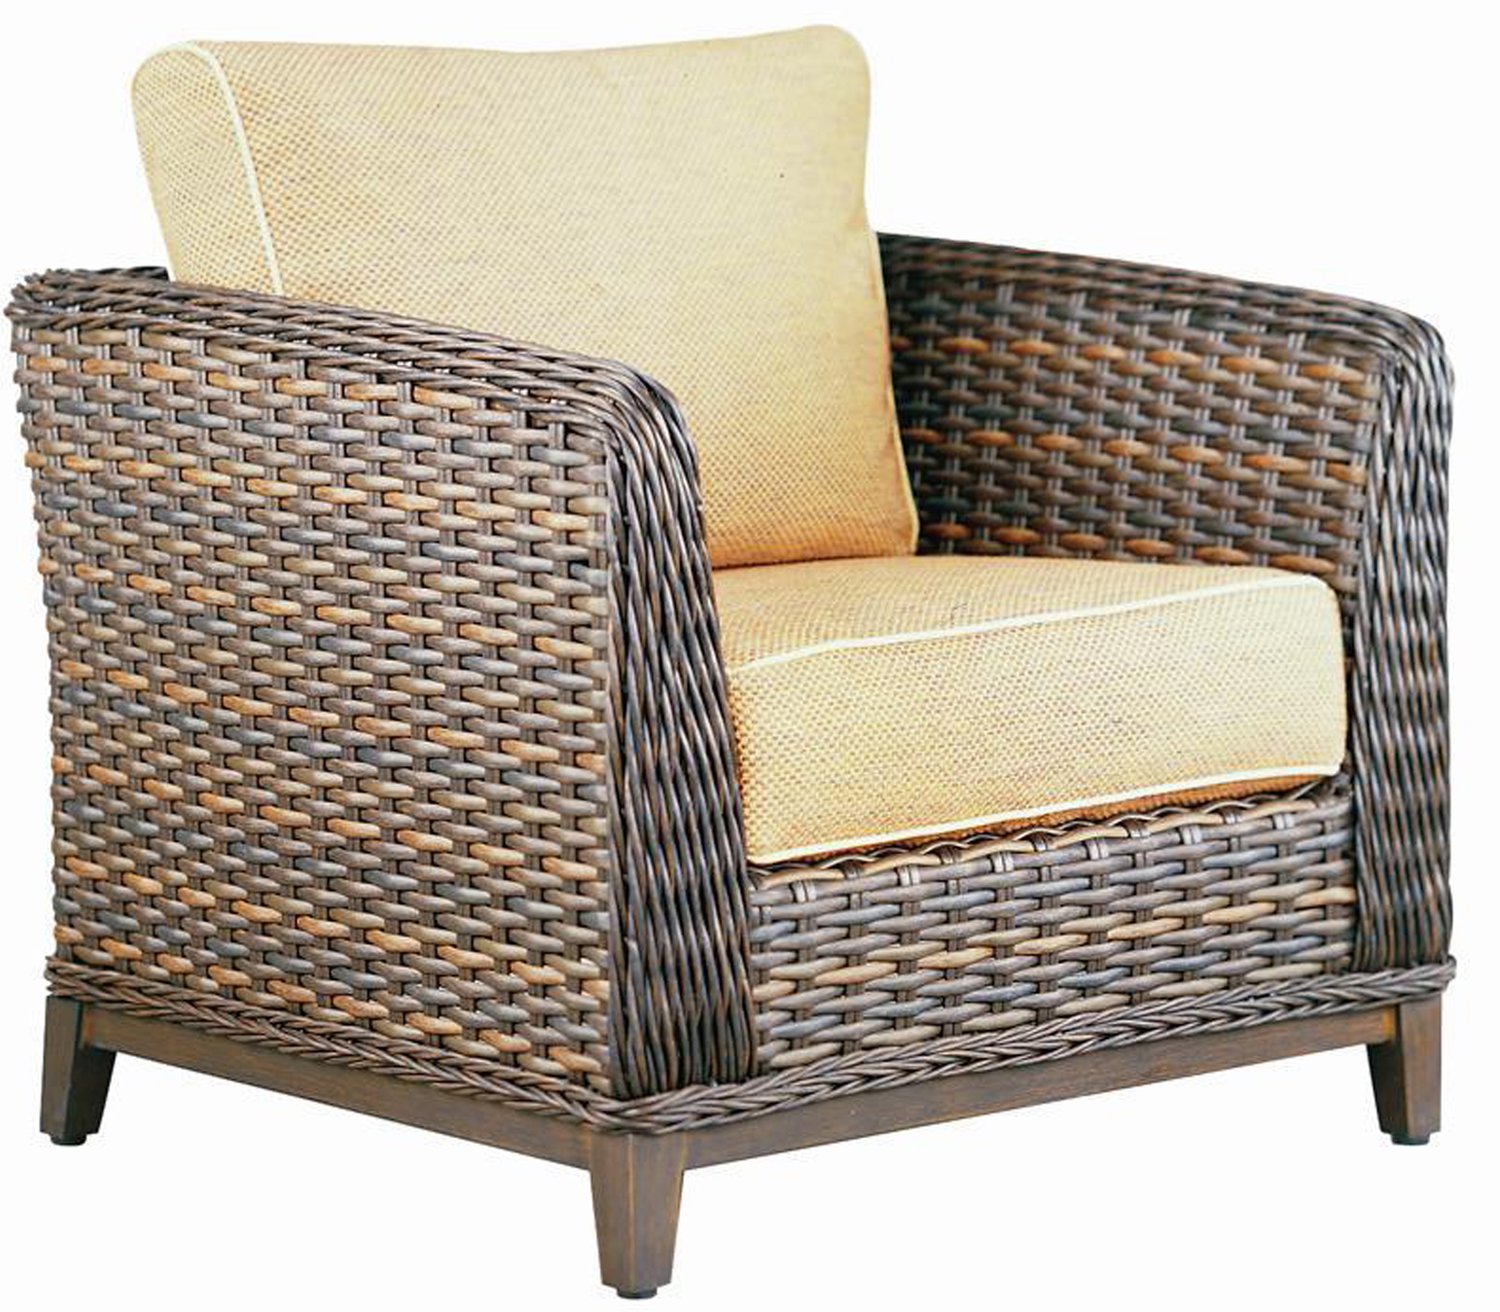 Catalina Lounge chair by Patio Renaissance